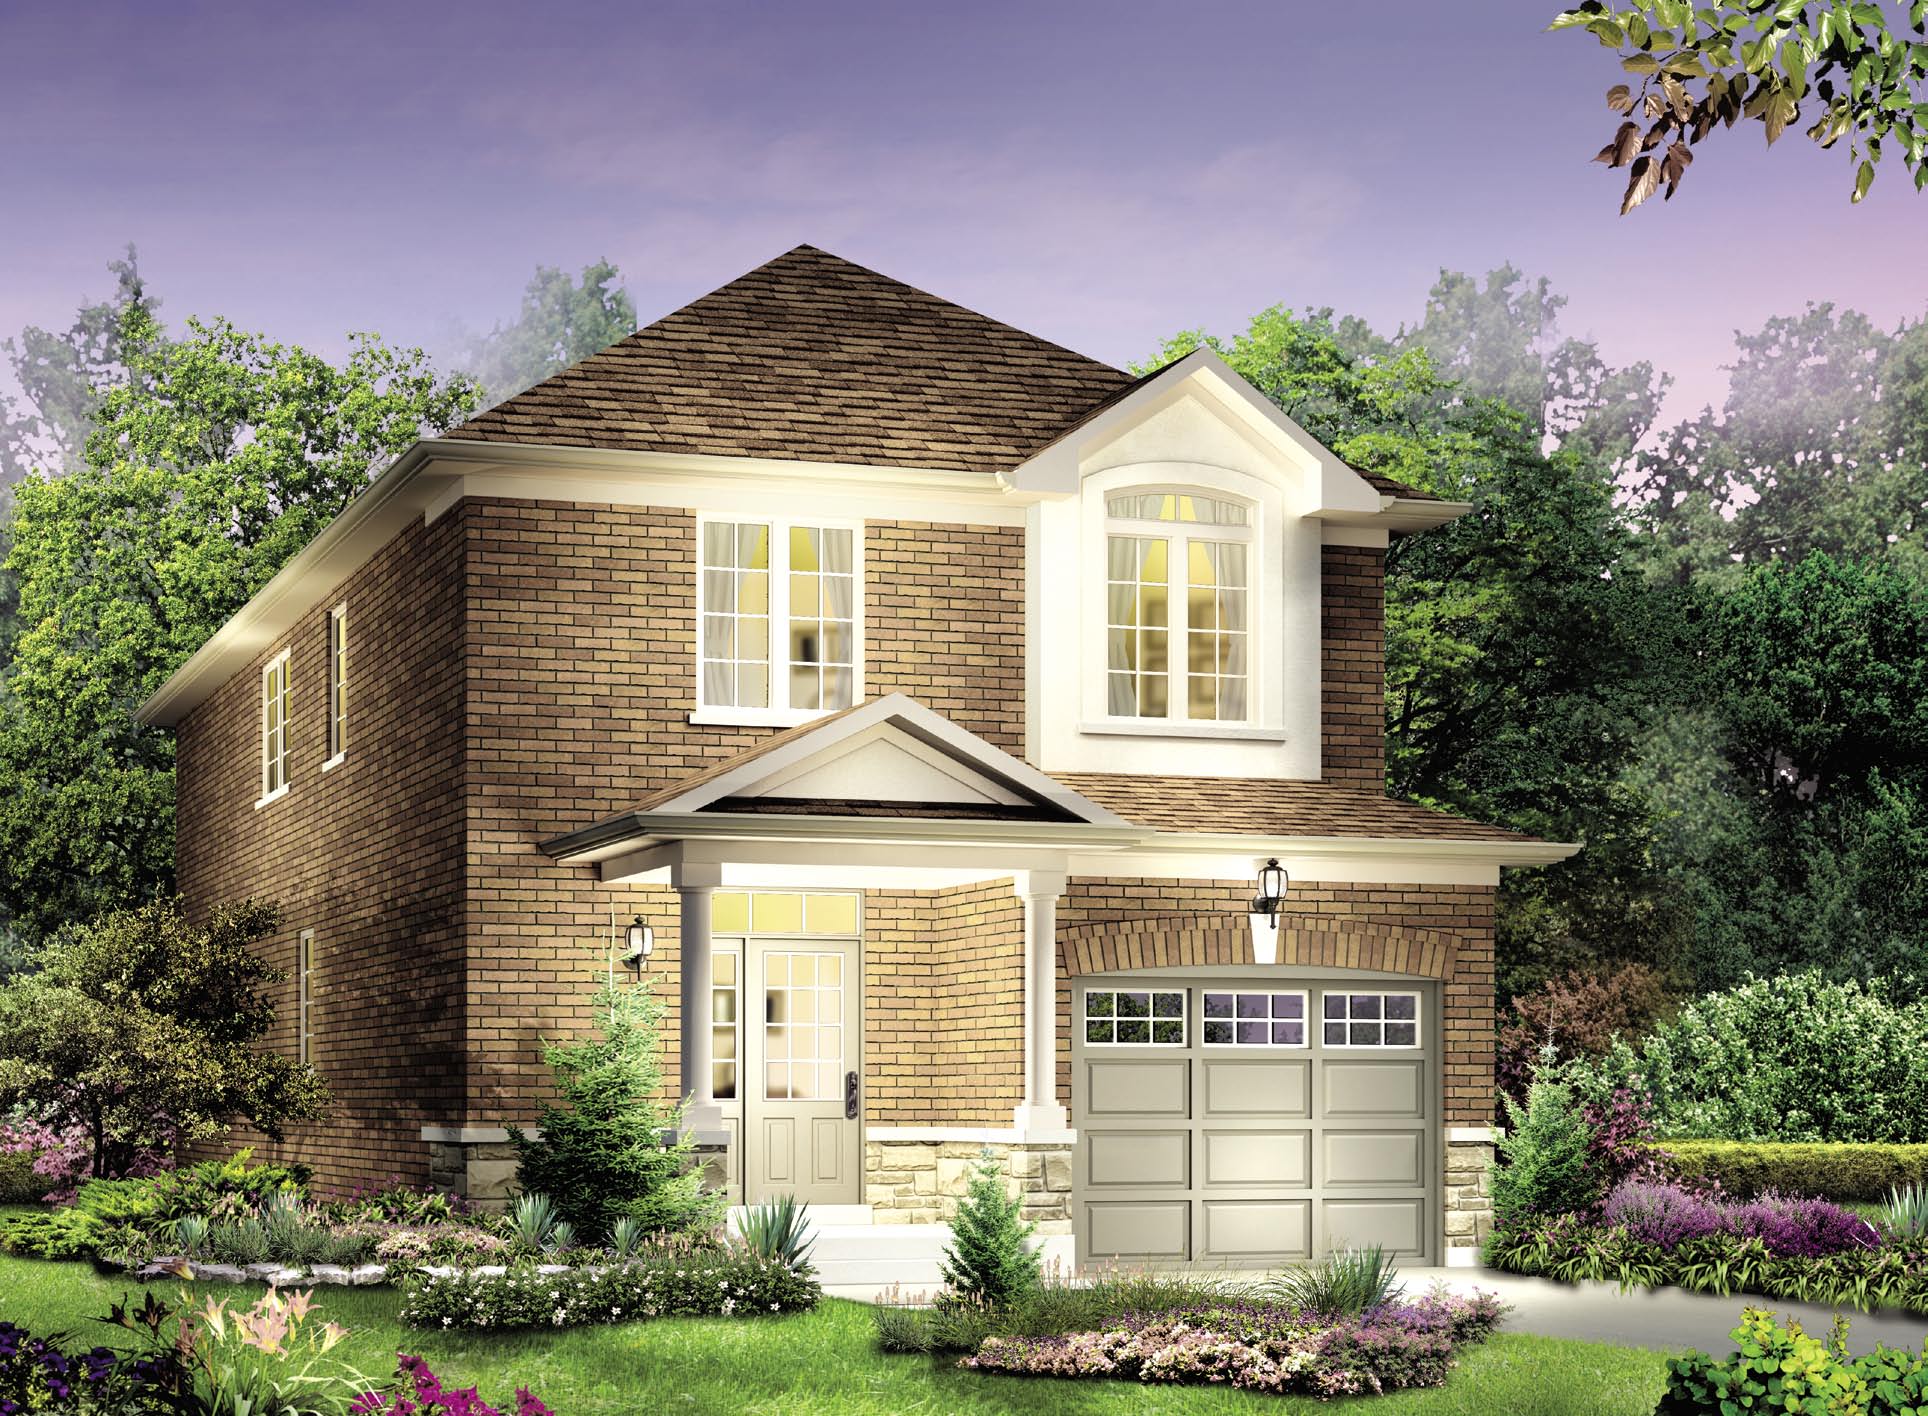 Oxford - Elevation A - 1755 sq. ft.